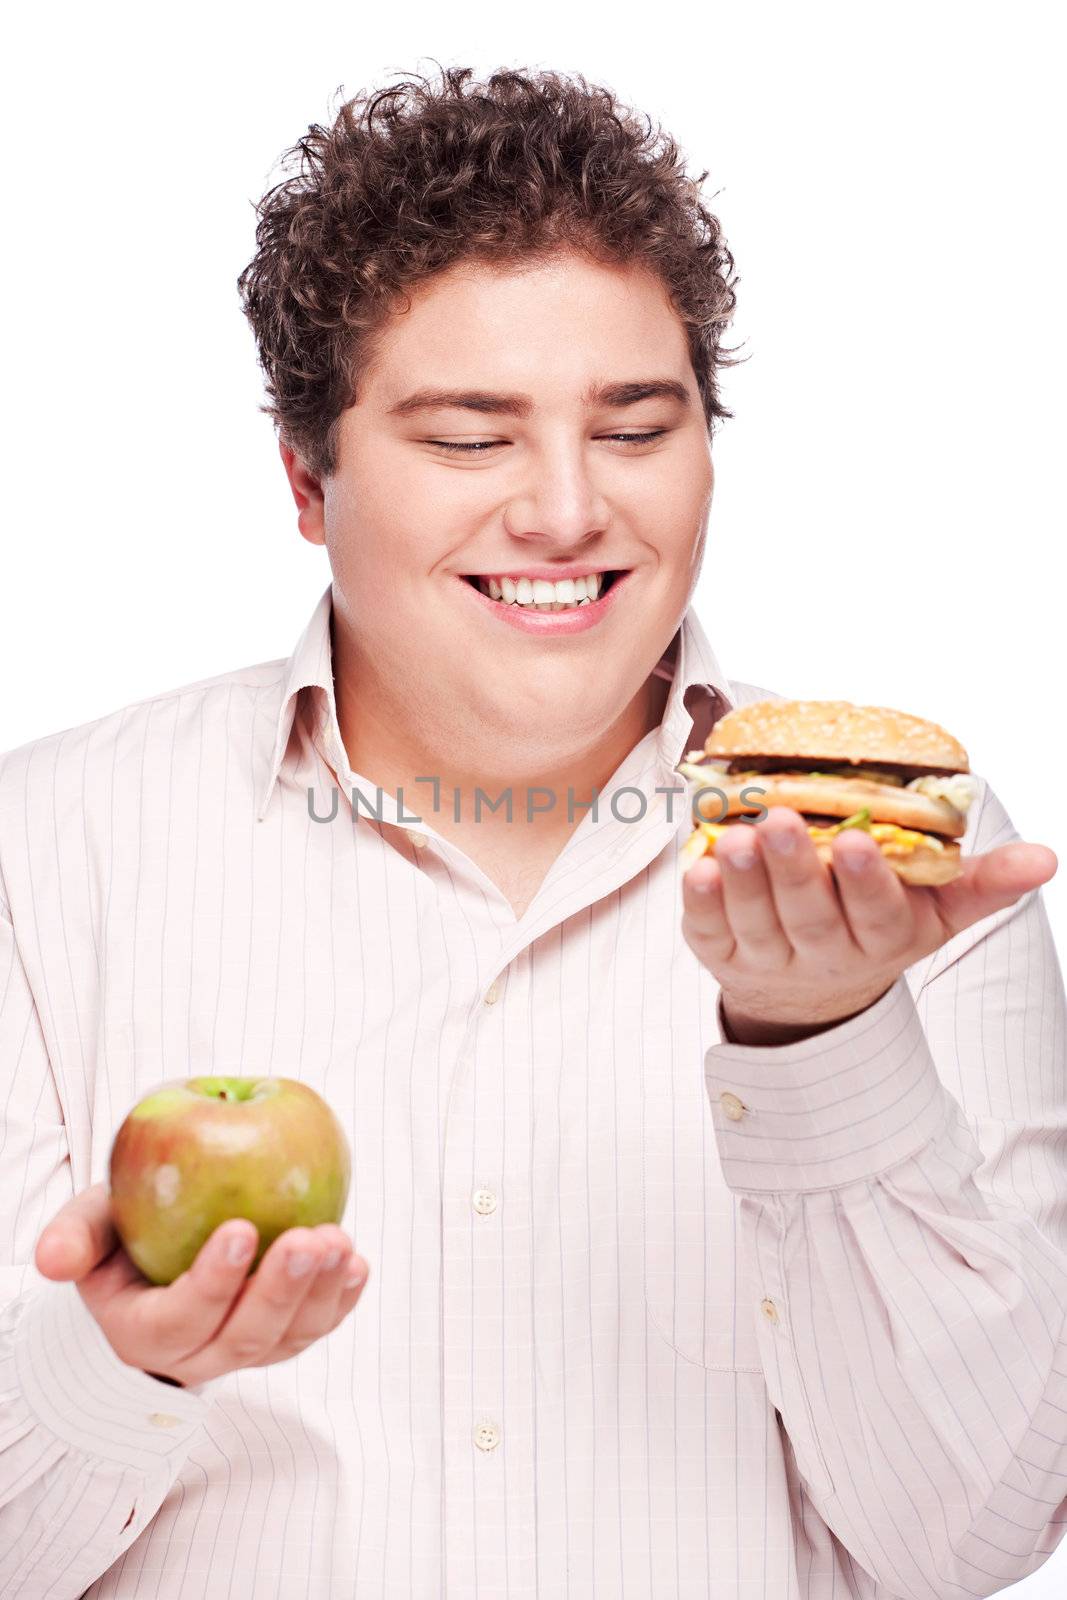 Young chubby man holding apple and hamburger, isolated on white